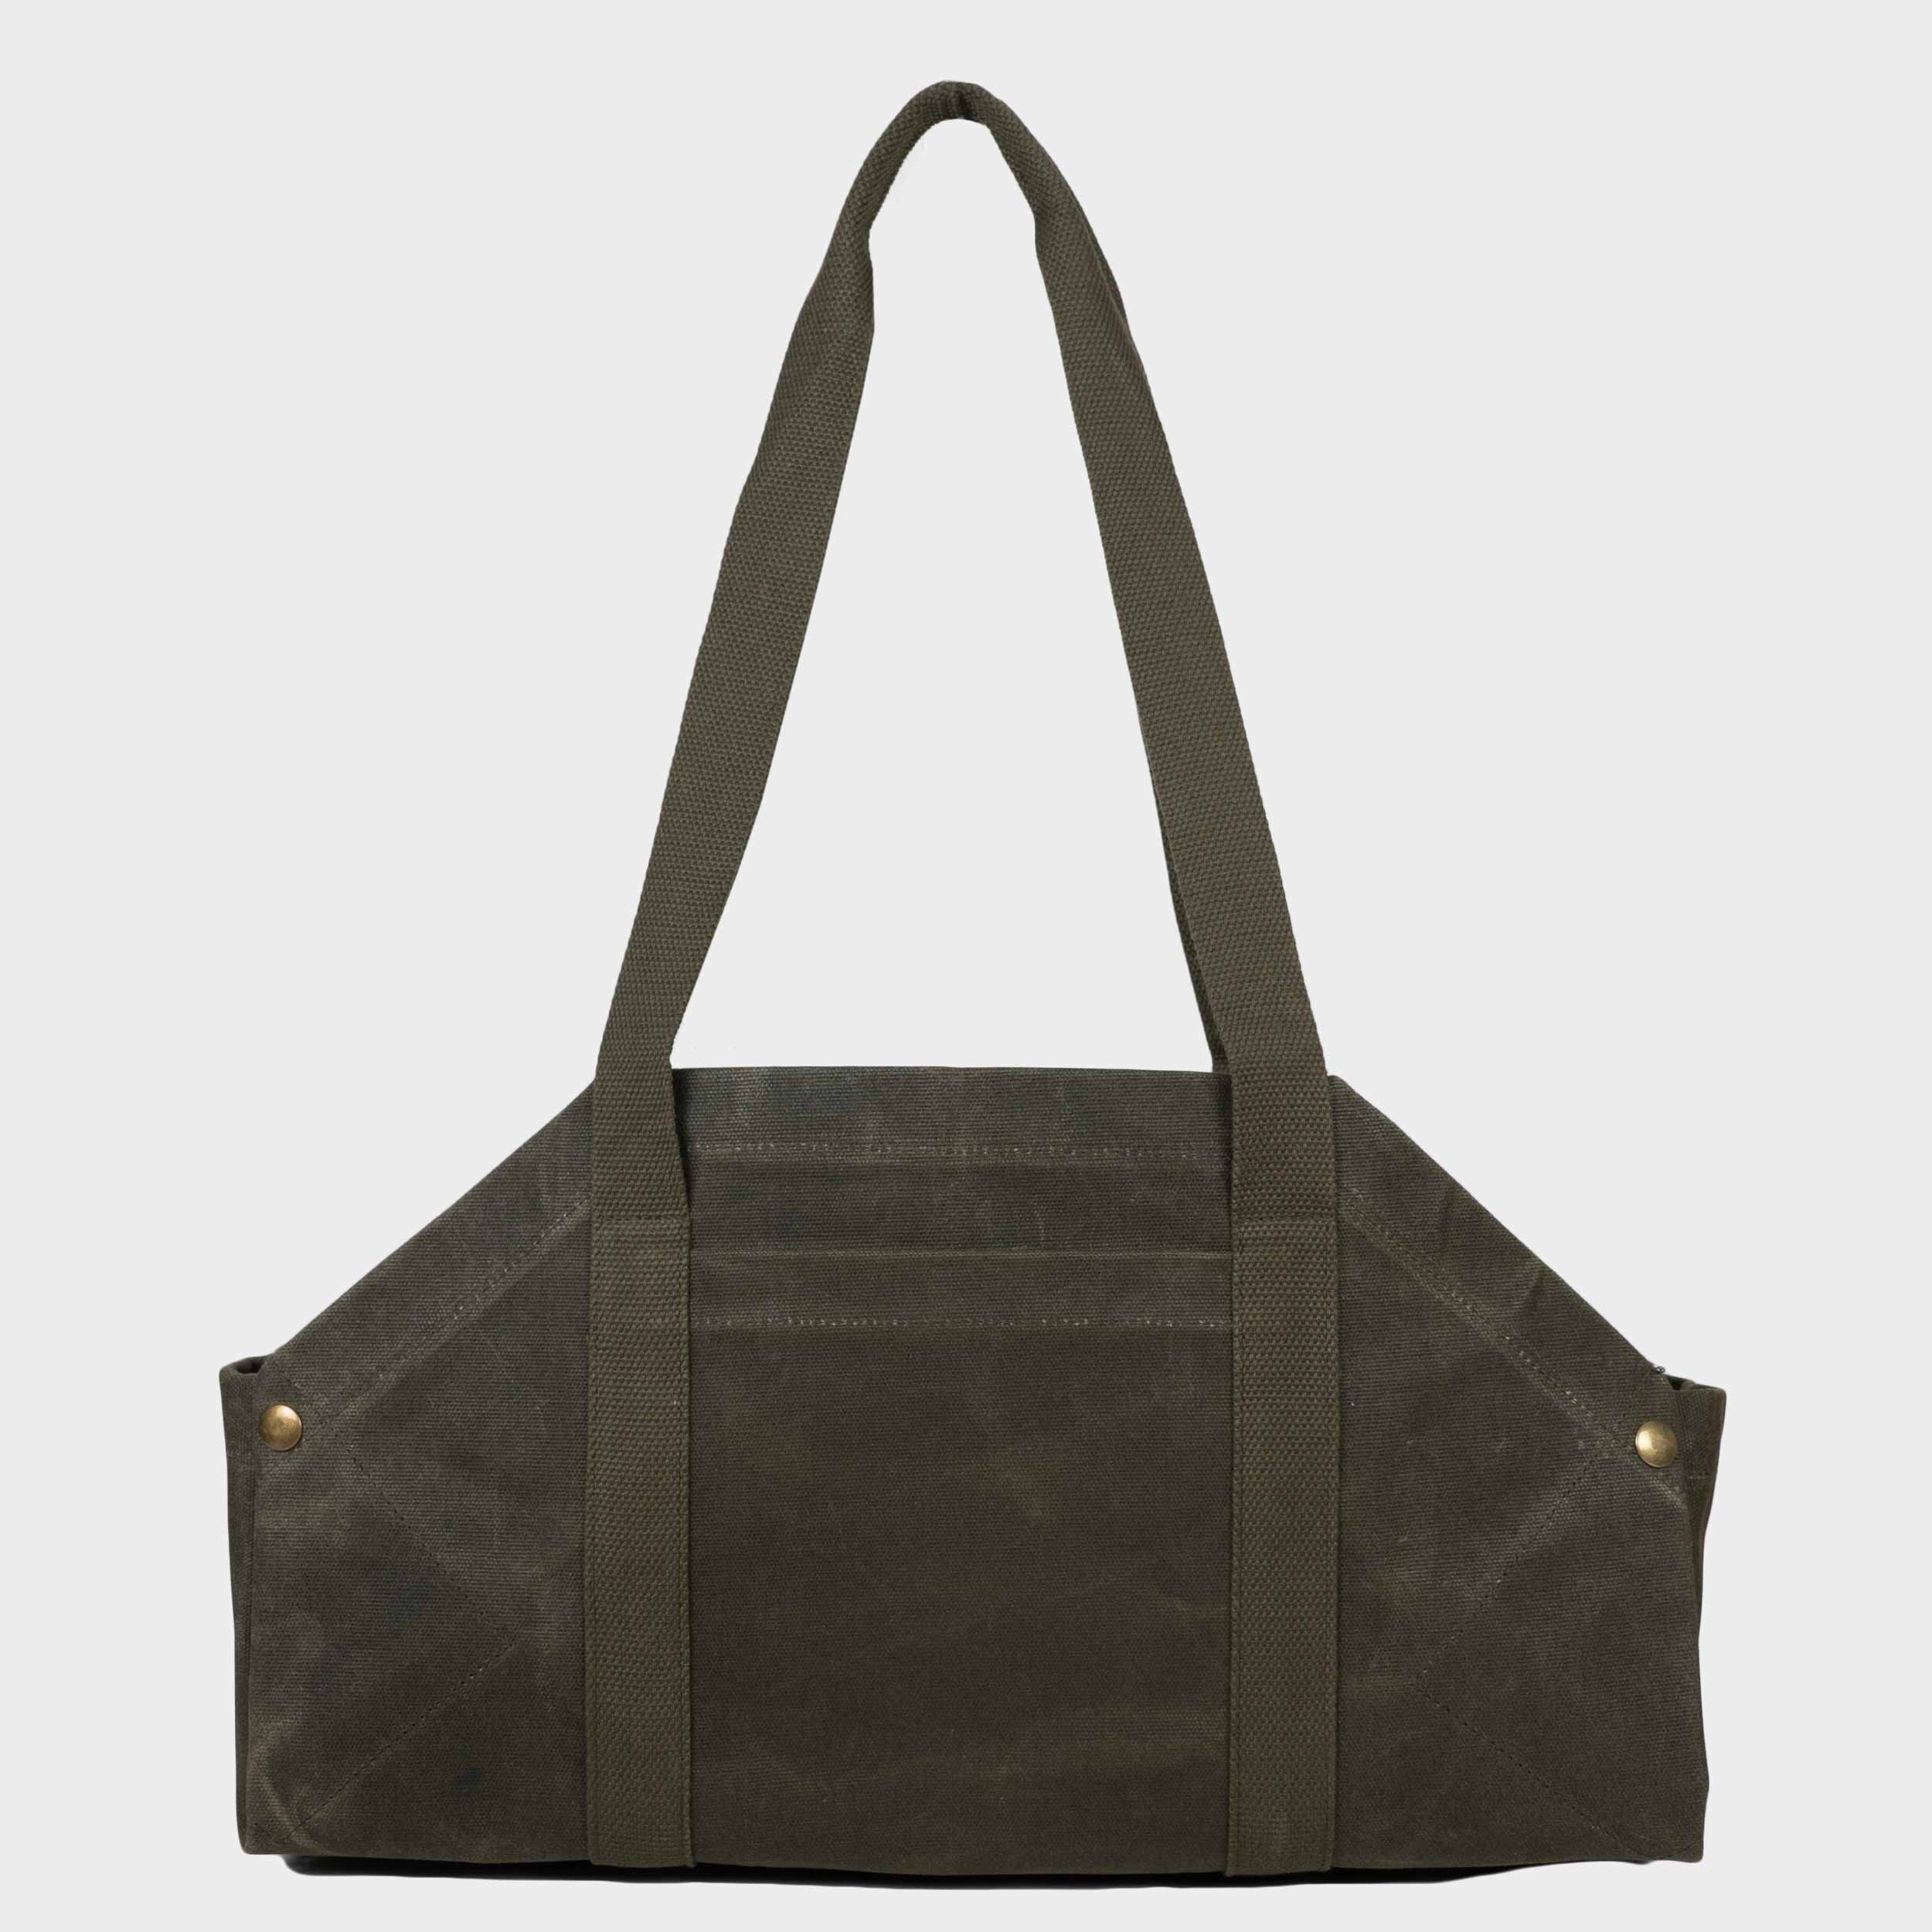 Gardenheir Waxed Canvas Origami Harvesting Trug/Tote in Olive